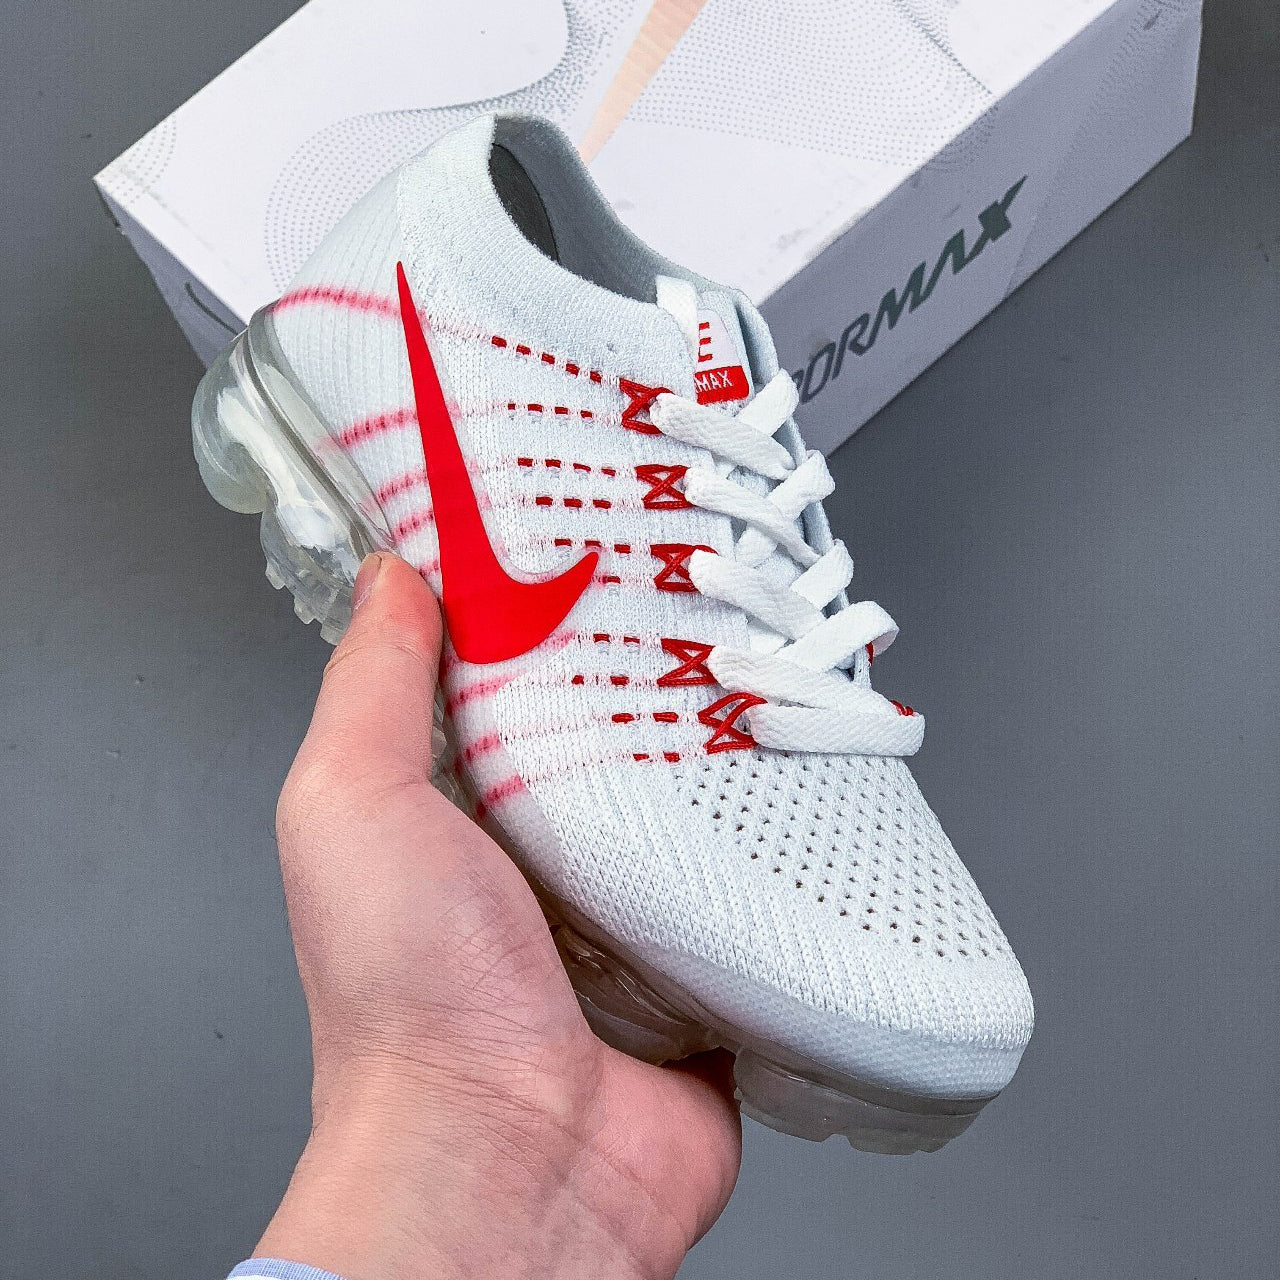 Nike Air Vapormax Flyknit Sneakers Shoes